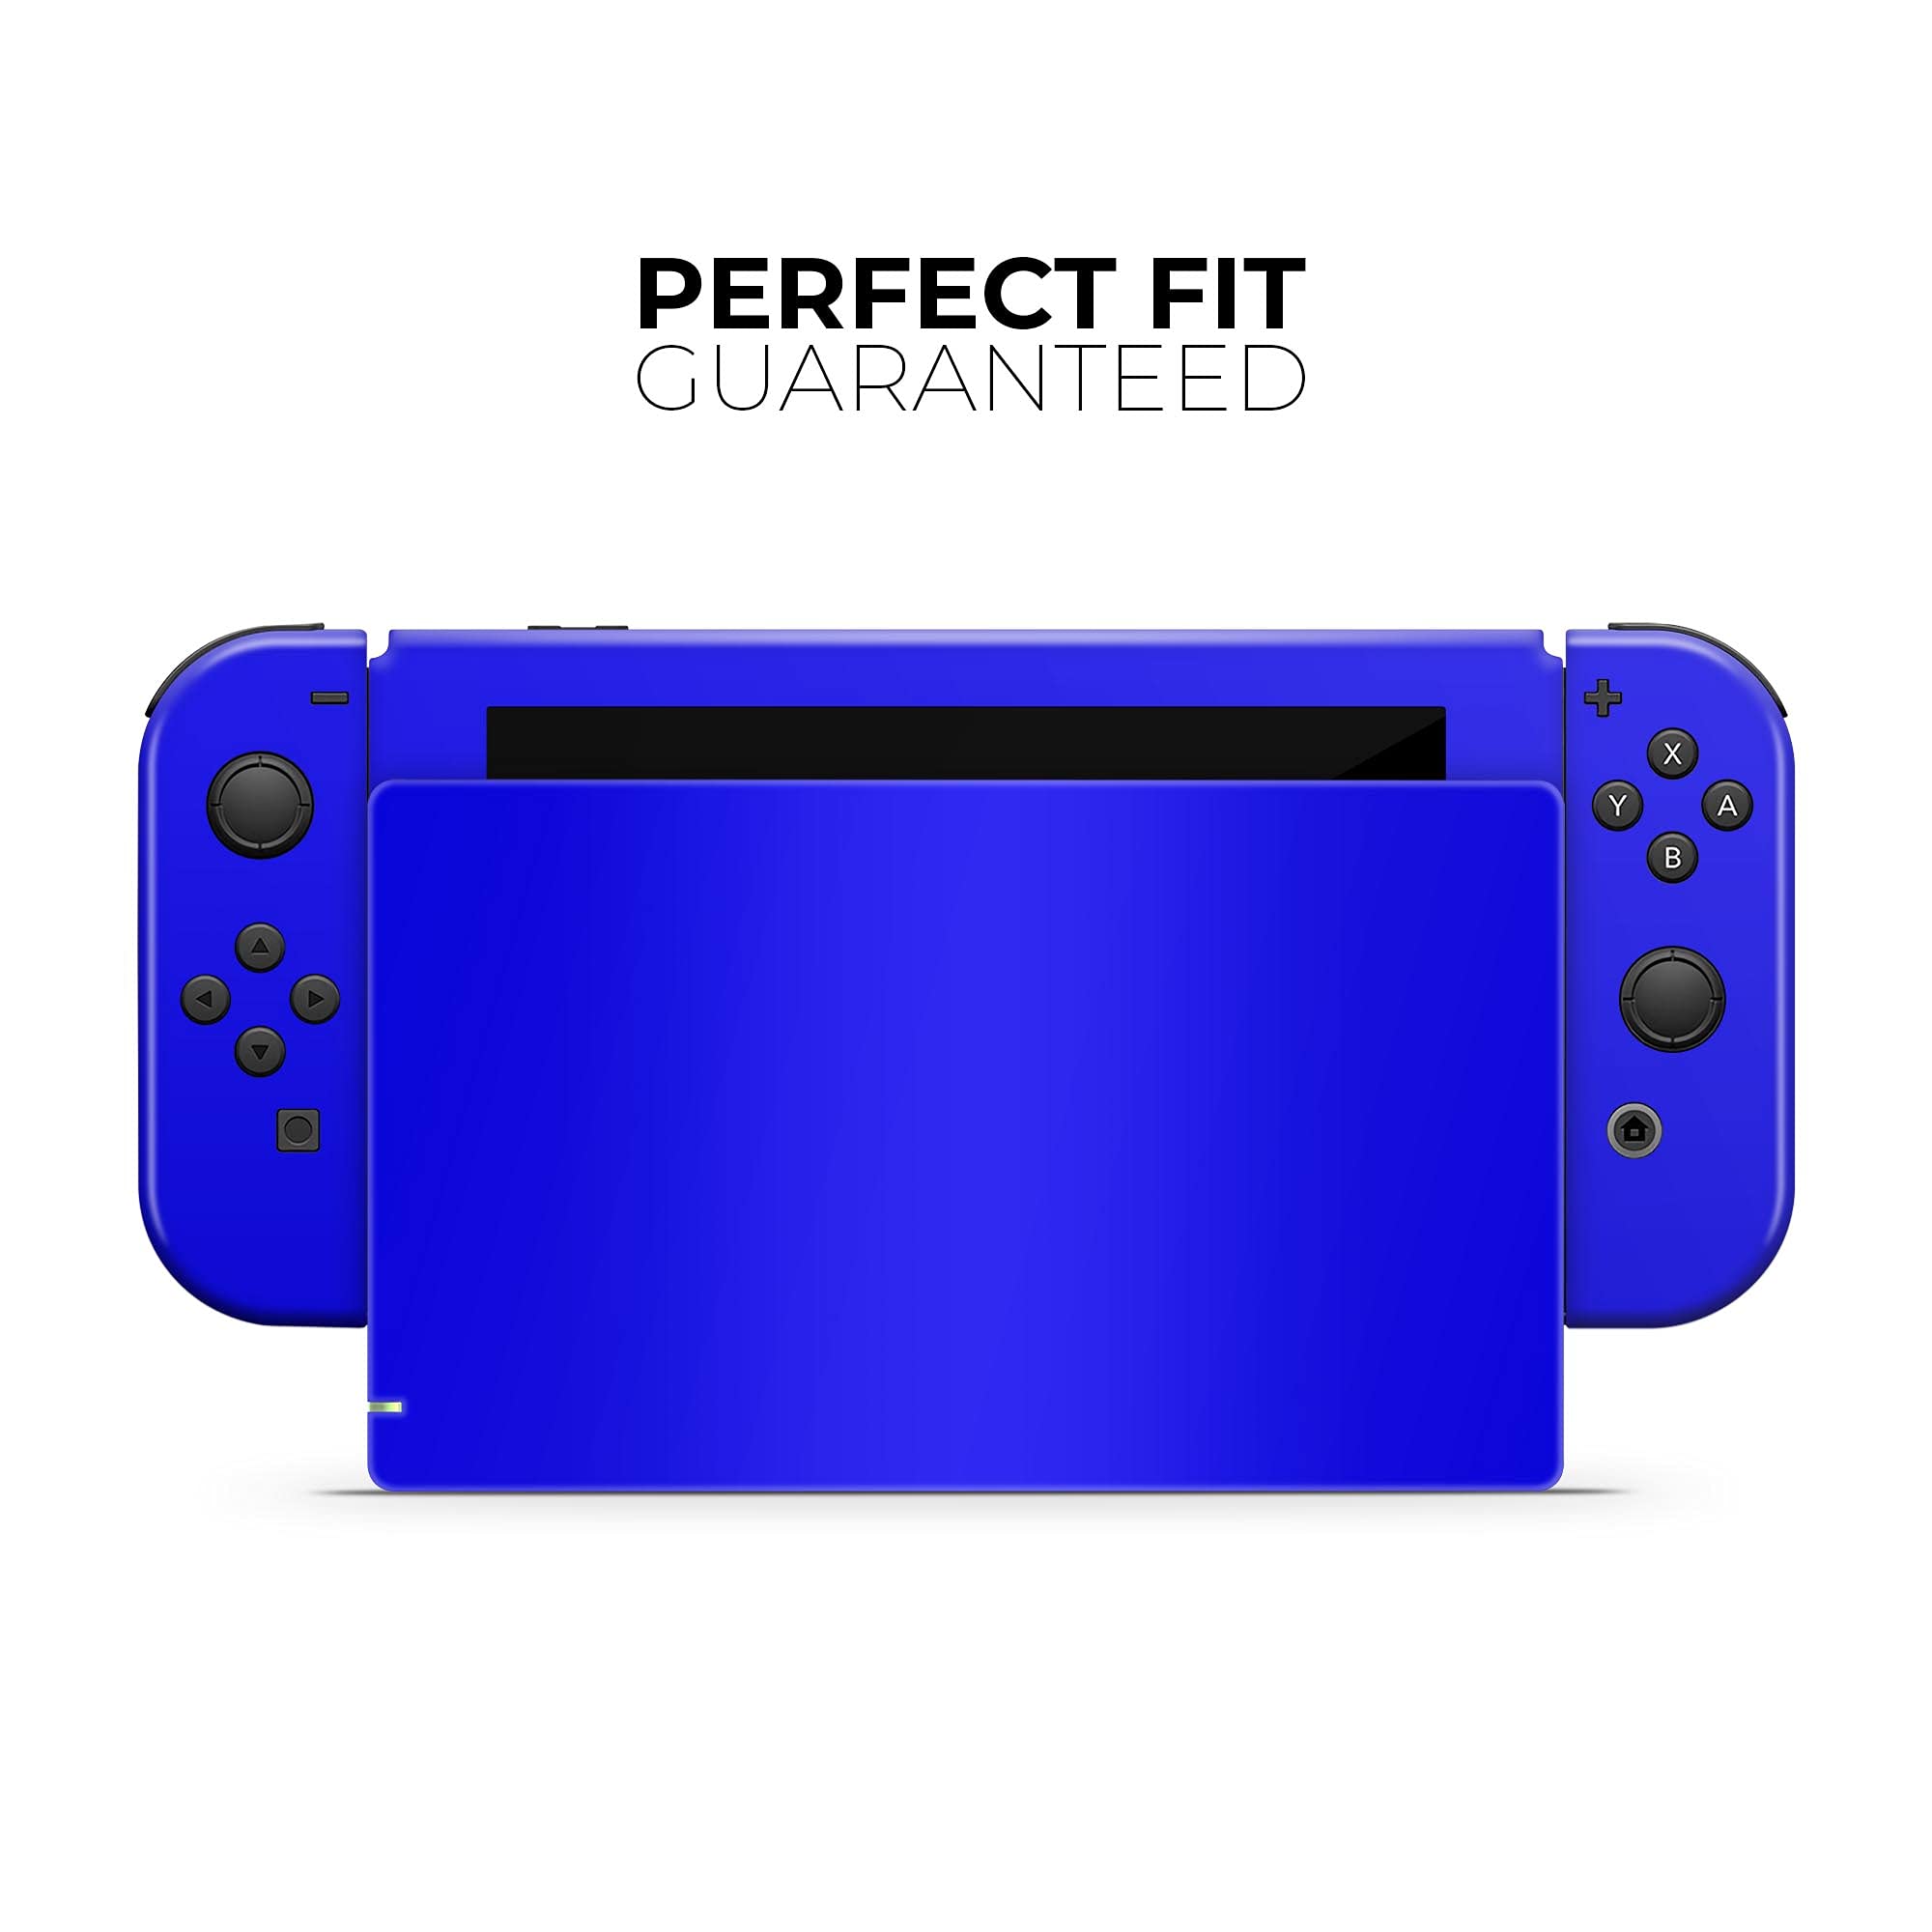 Design Skinz - Compatible with Nintendo Switch OLED Console + Joy-Con - Skin Decal Protective Scratch-Resistant Removable Vinyl Wrap Cover - Solid Royal Blue